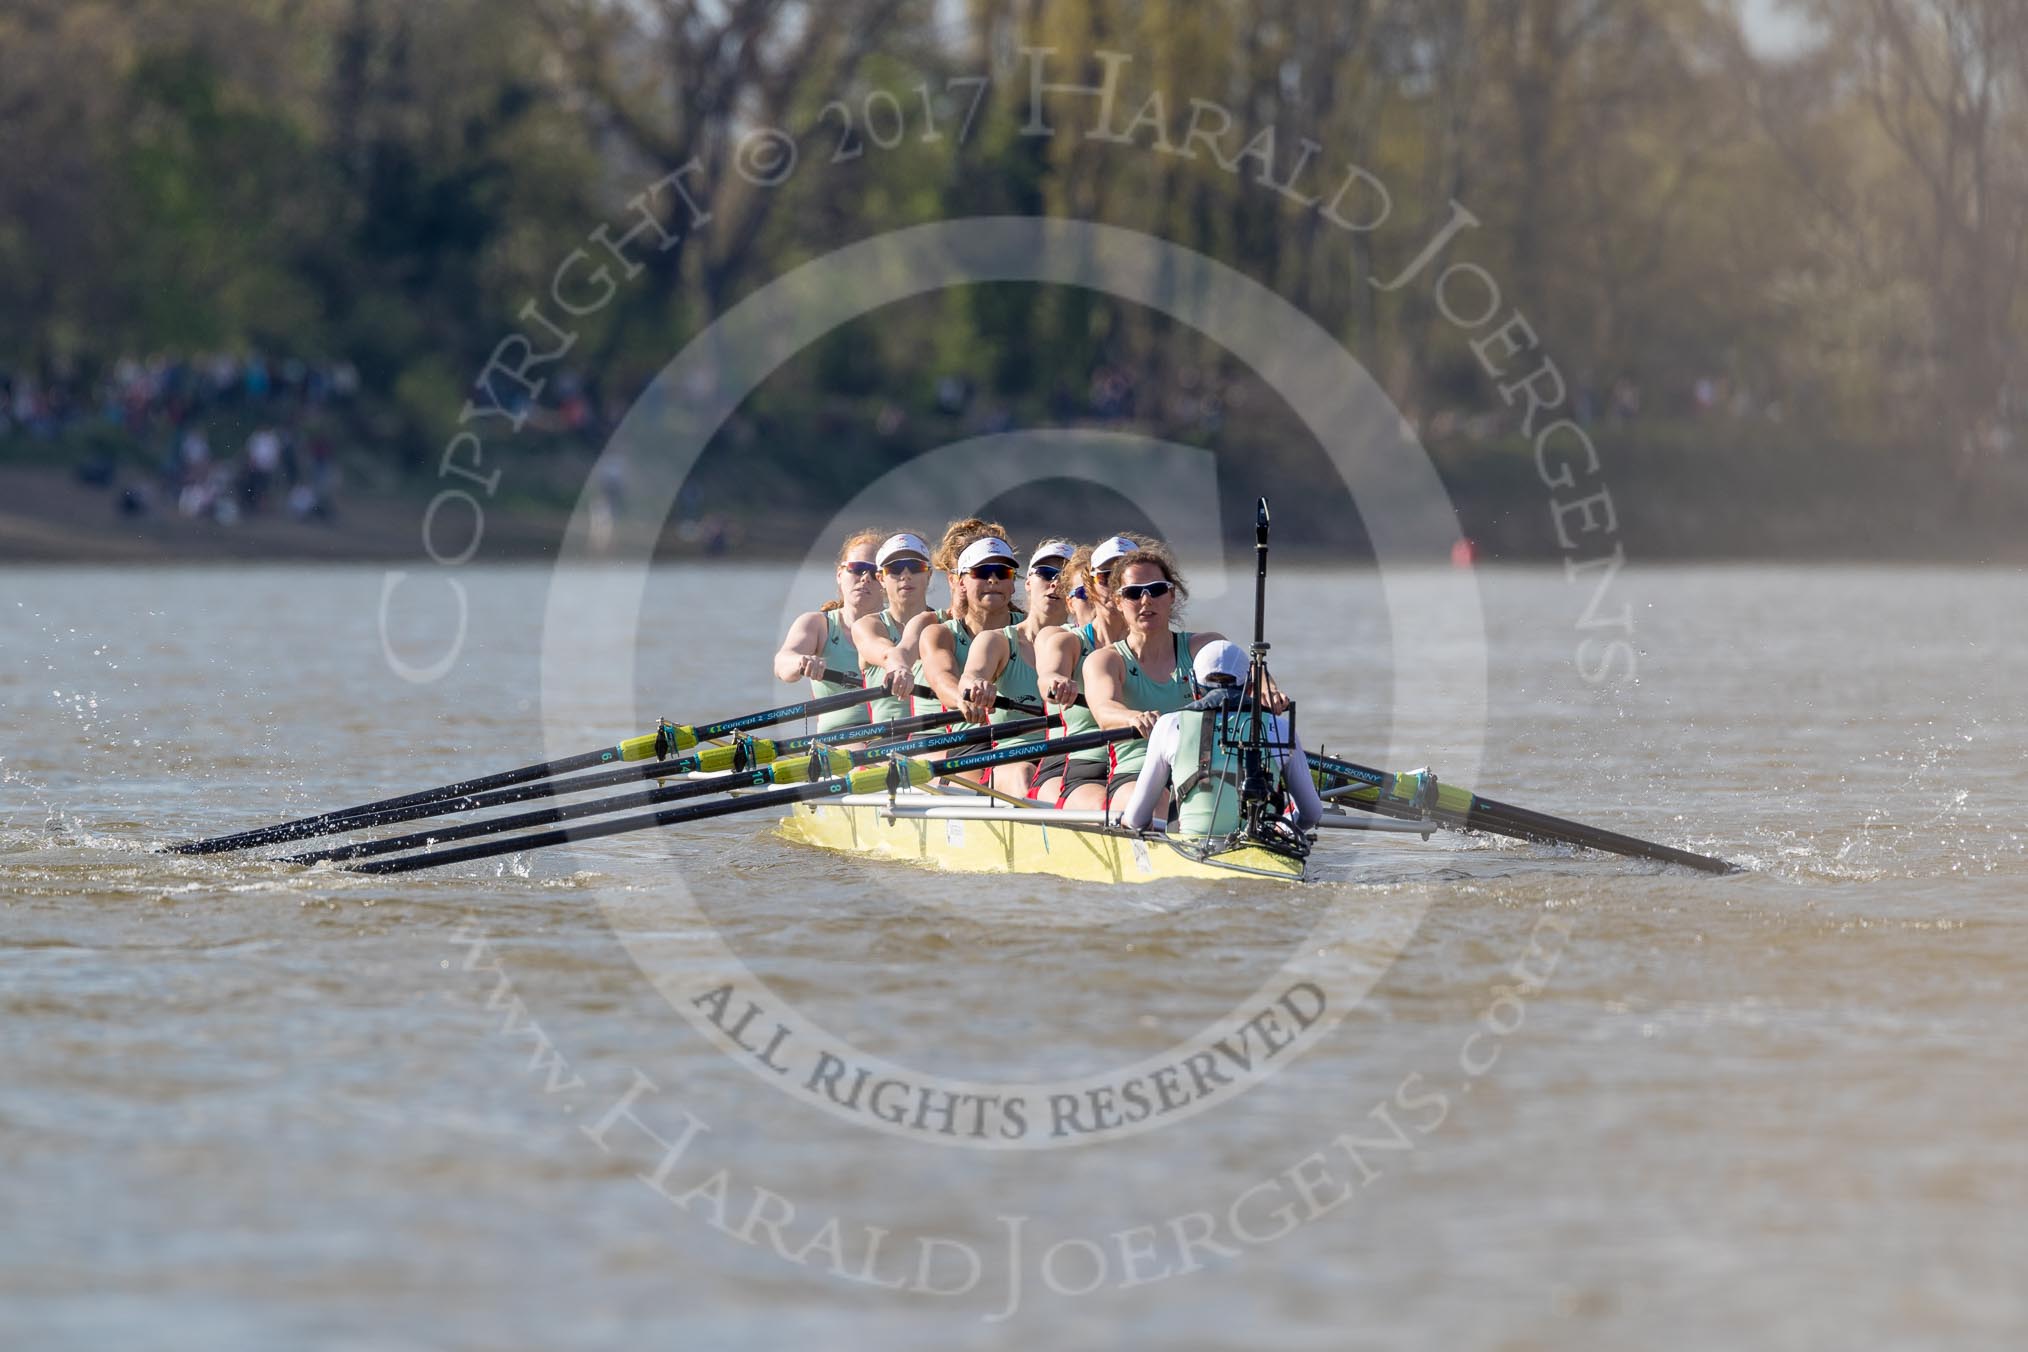 The Boat Race season 2017 -  The Cancer Research Women's Boat Race: Cambridge leading comfortably in the spring sunshine - Bow Ashton Brown, 2 Imogen Grant, 3 Claire Lambe, 4 Anna Dawson, 5 Holly Hill, 6 Alice White, 7 Myriam Goudet, stroke Melissa Wilson, cox Matthew Holland.
River Thames between Putney Bridge and Mortlake,
London SW15,

United Kingdom,
on 02 April 2017 at 16:35, image #129